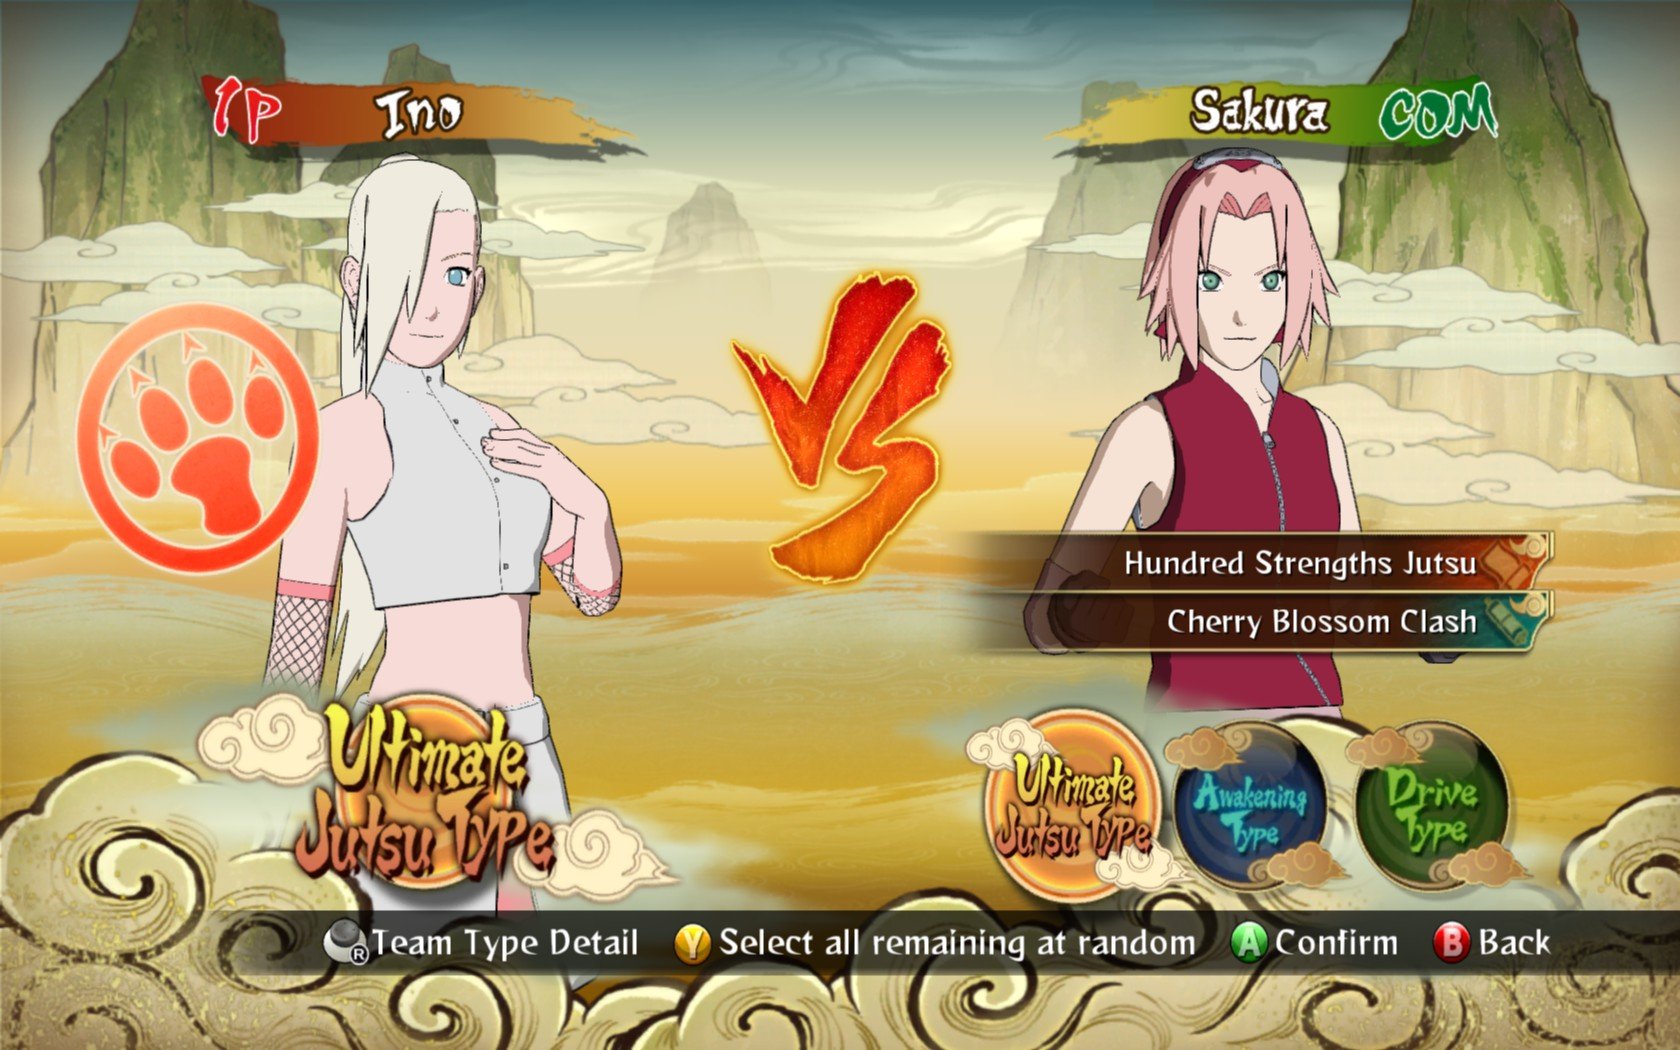 Naruto Ultimate Ninja Storm 3 scan leaked   - The Independent  Video Game Community